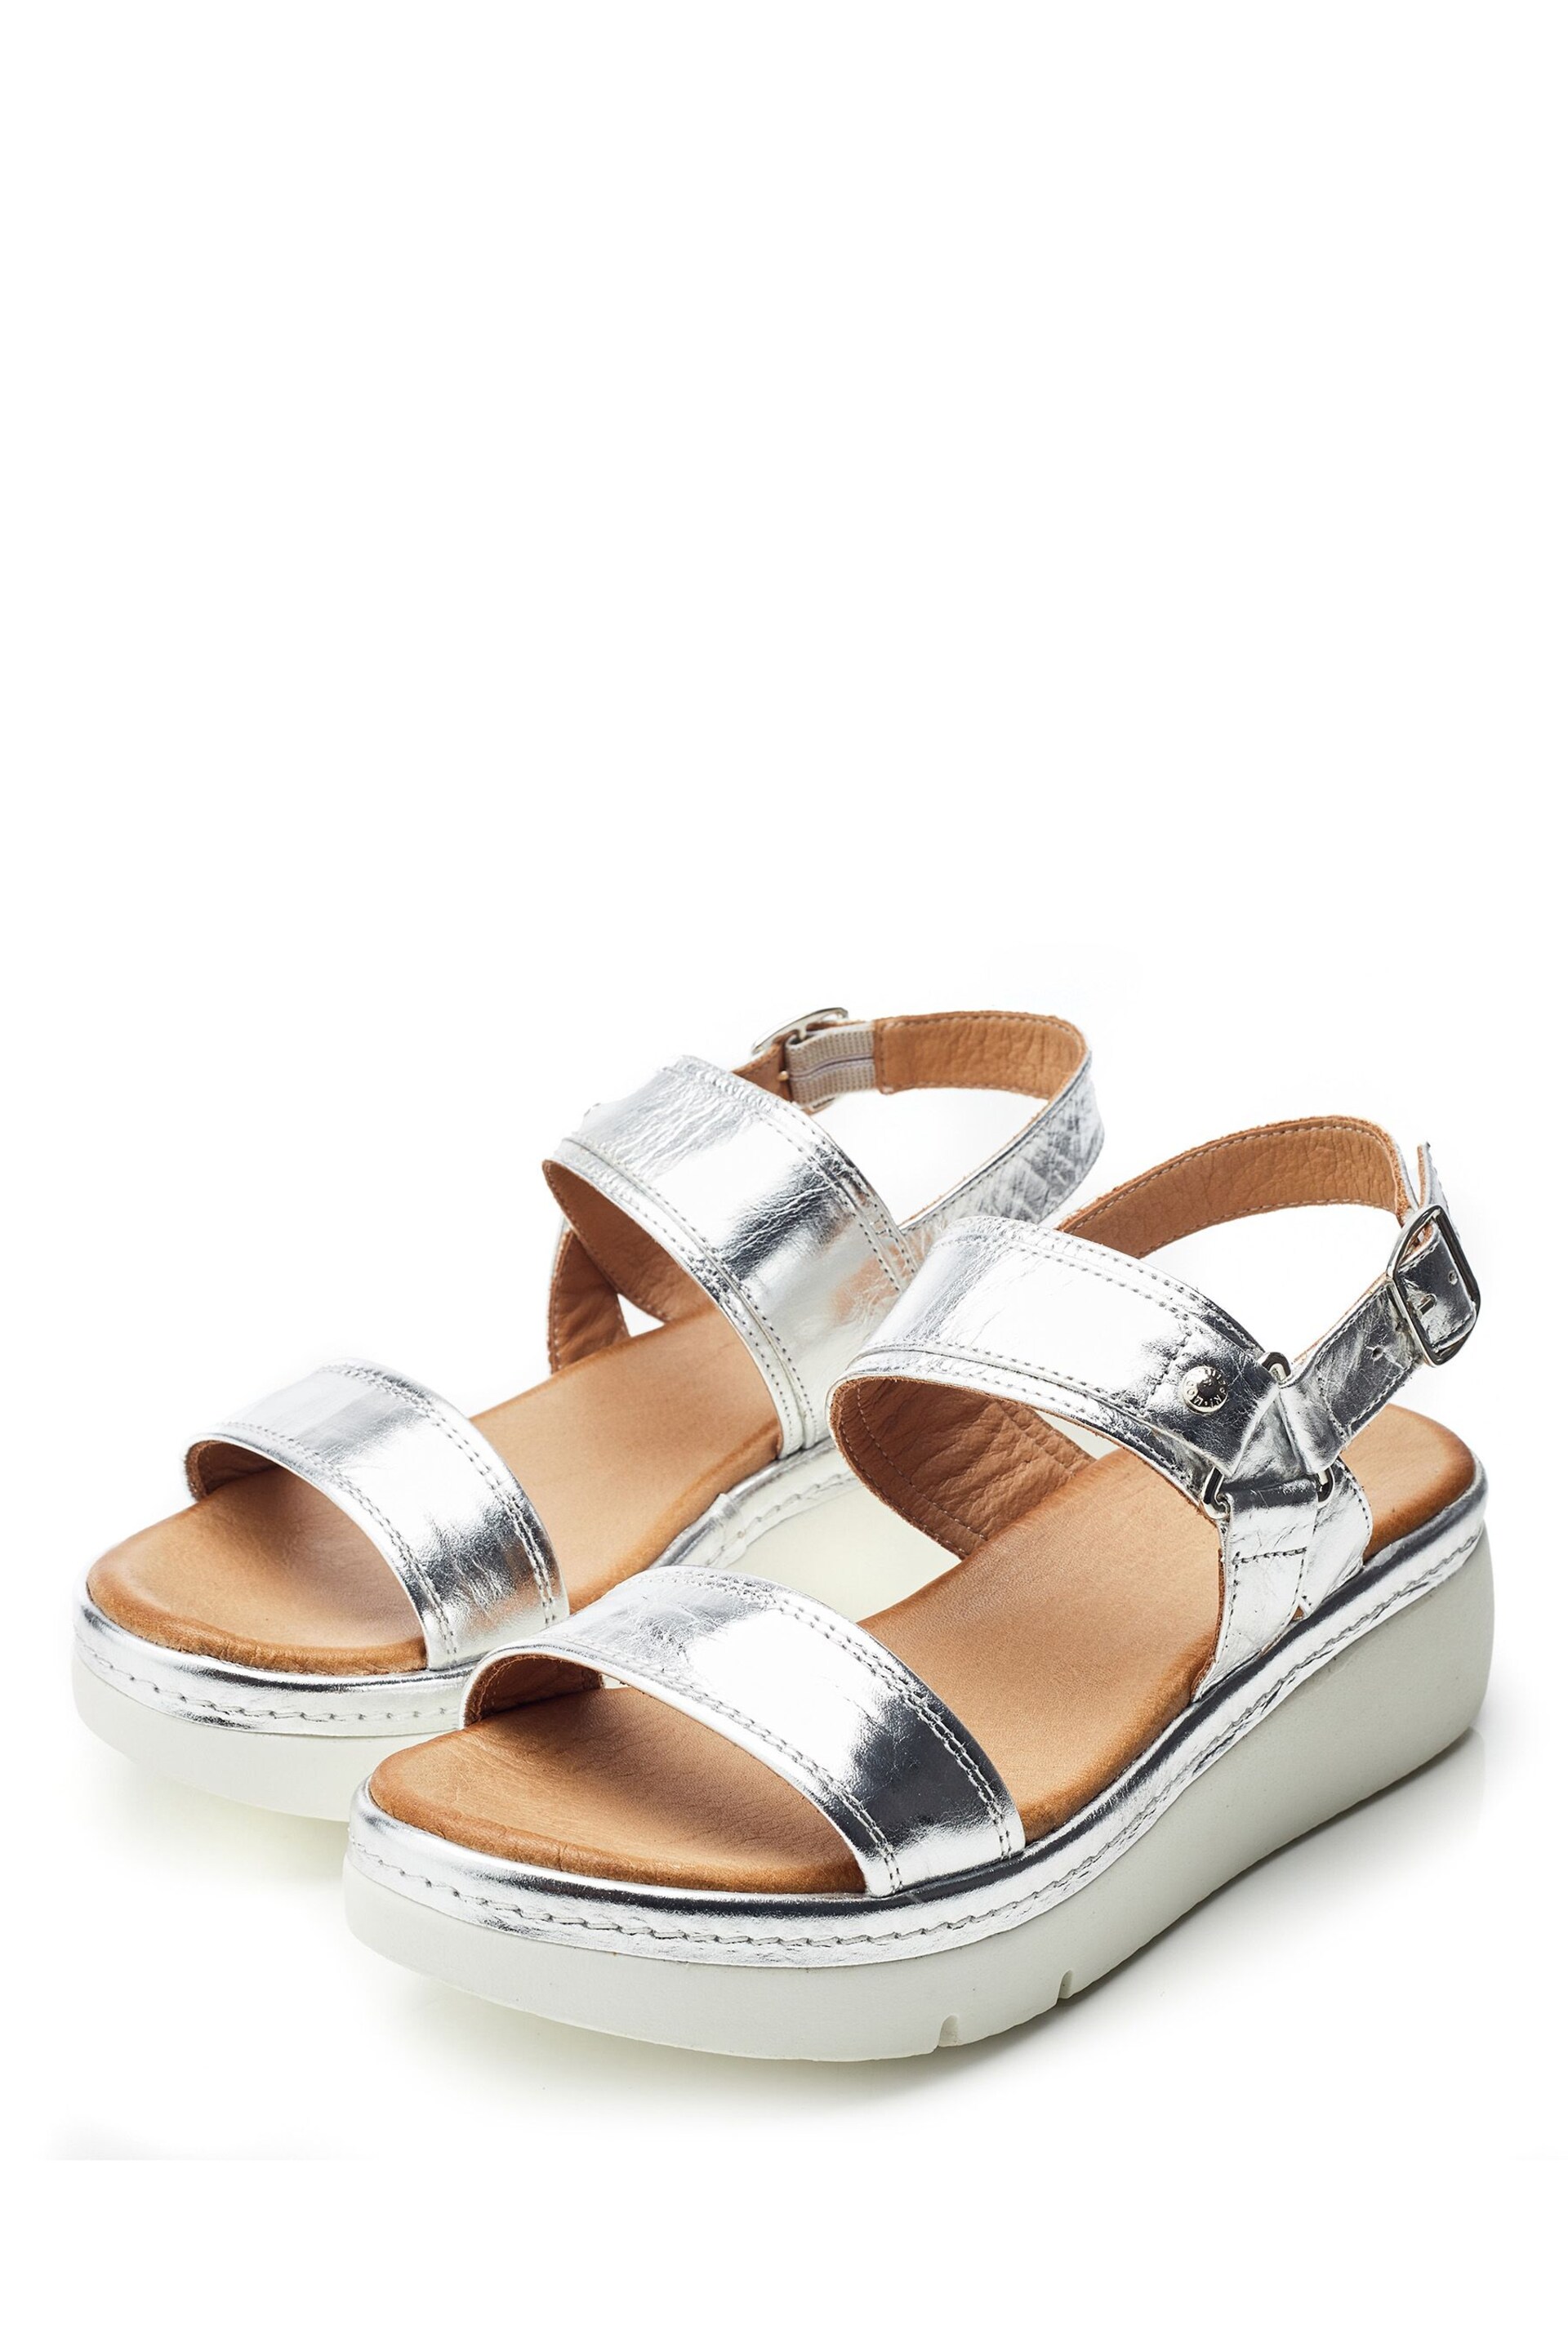 Moda in Pelle Tone Nelly Two Part Flexi Ring Hardware Wedge Sandals - Image 3 of 4